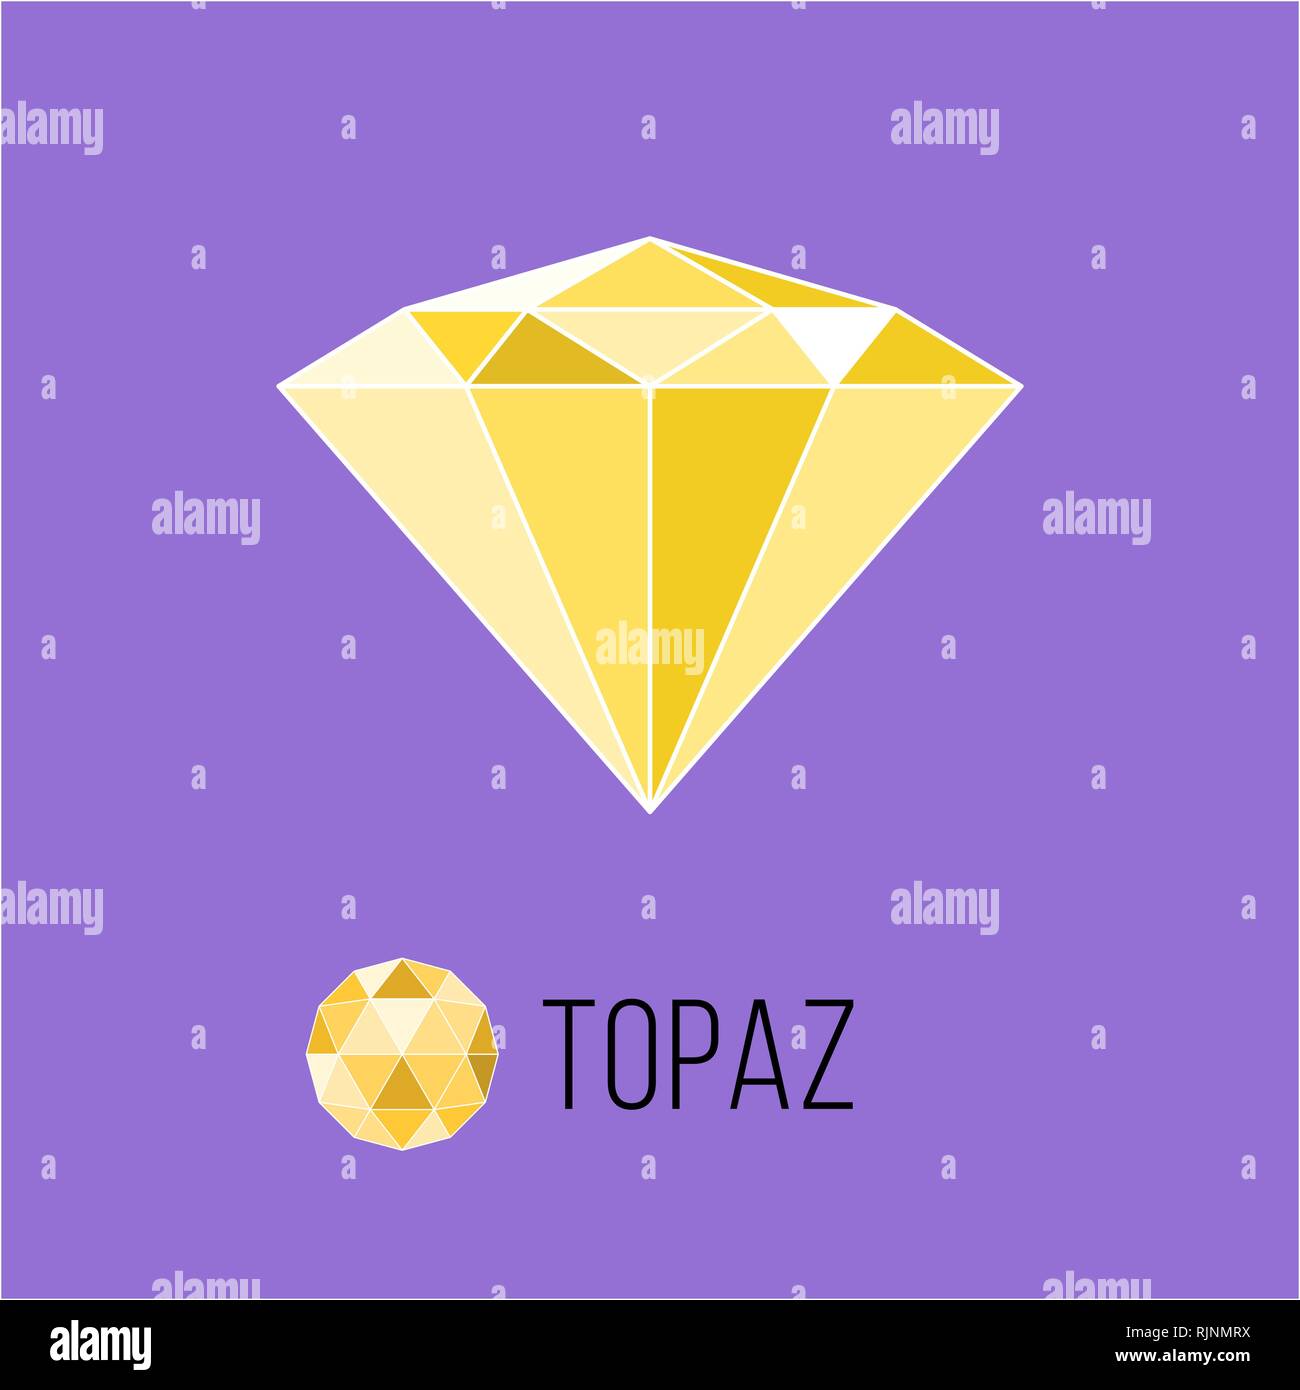 Topaz flat icon with top view. Rich luxury symbol. Vector illustration Stock Vector